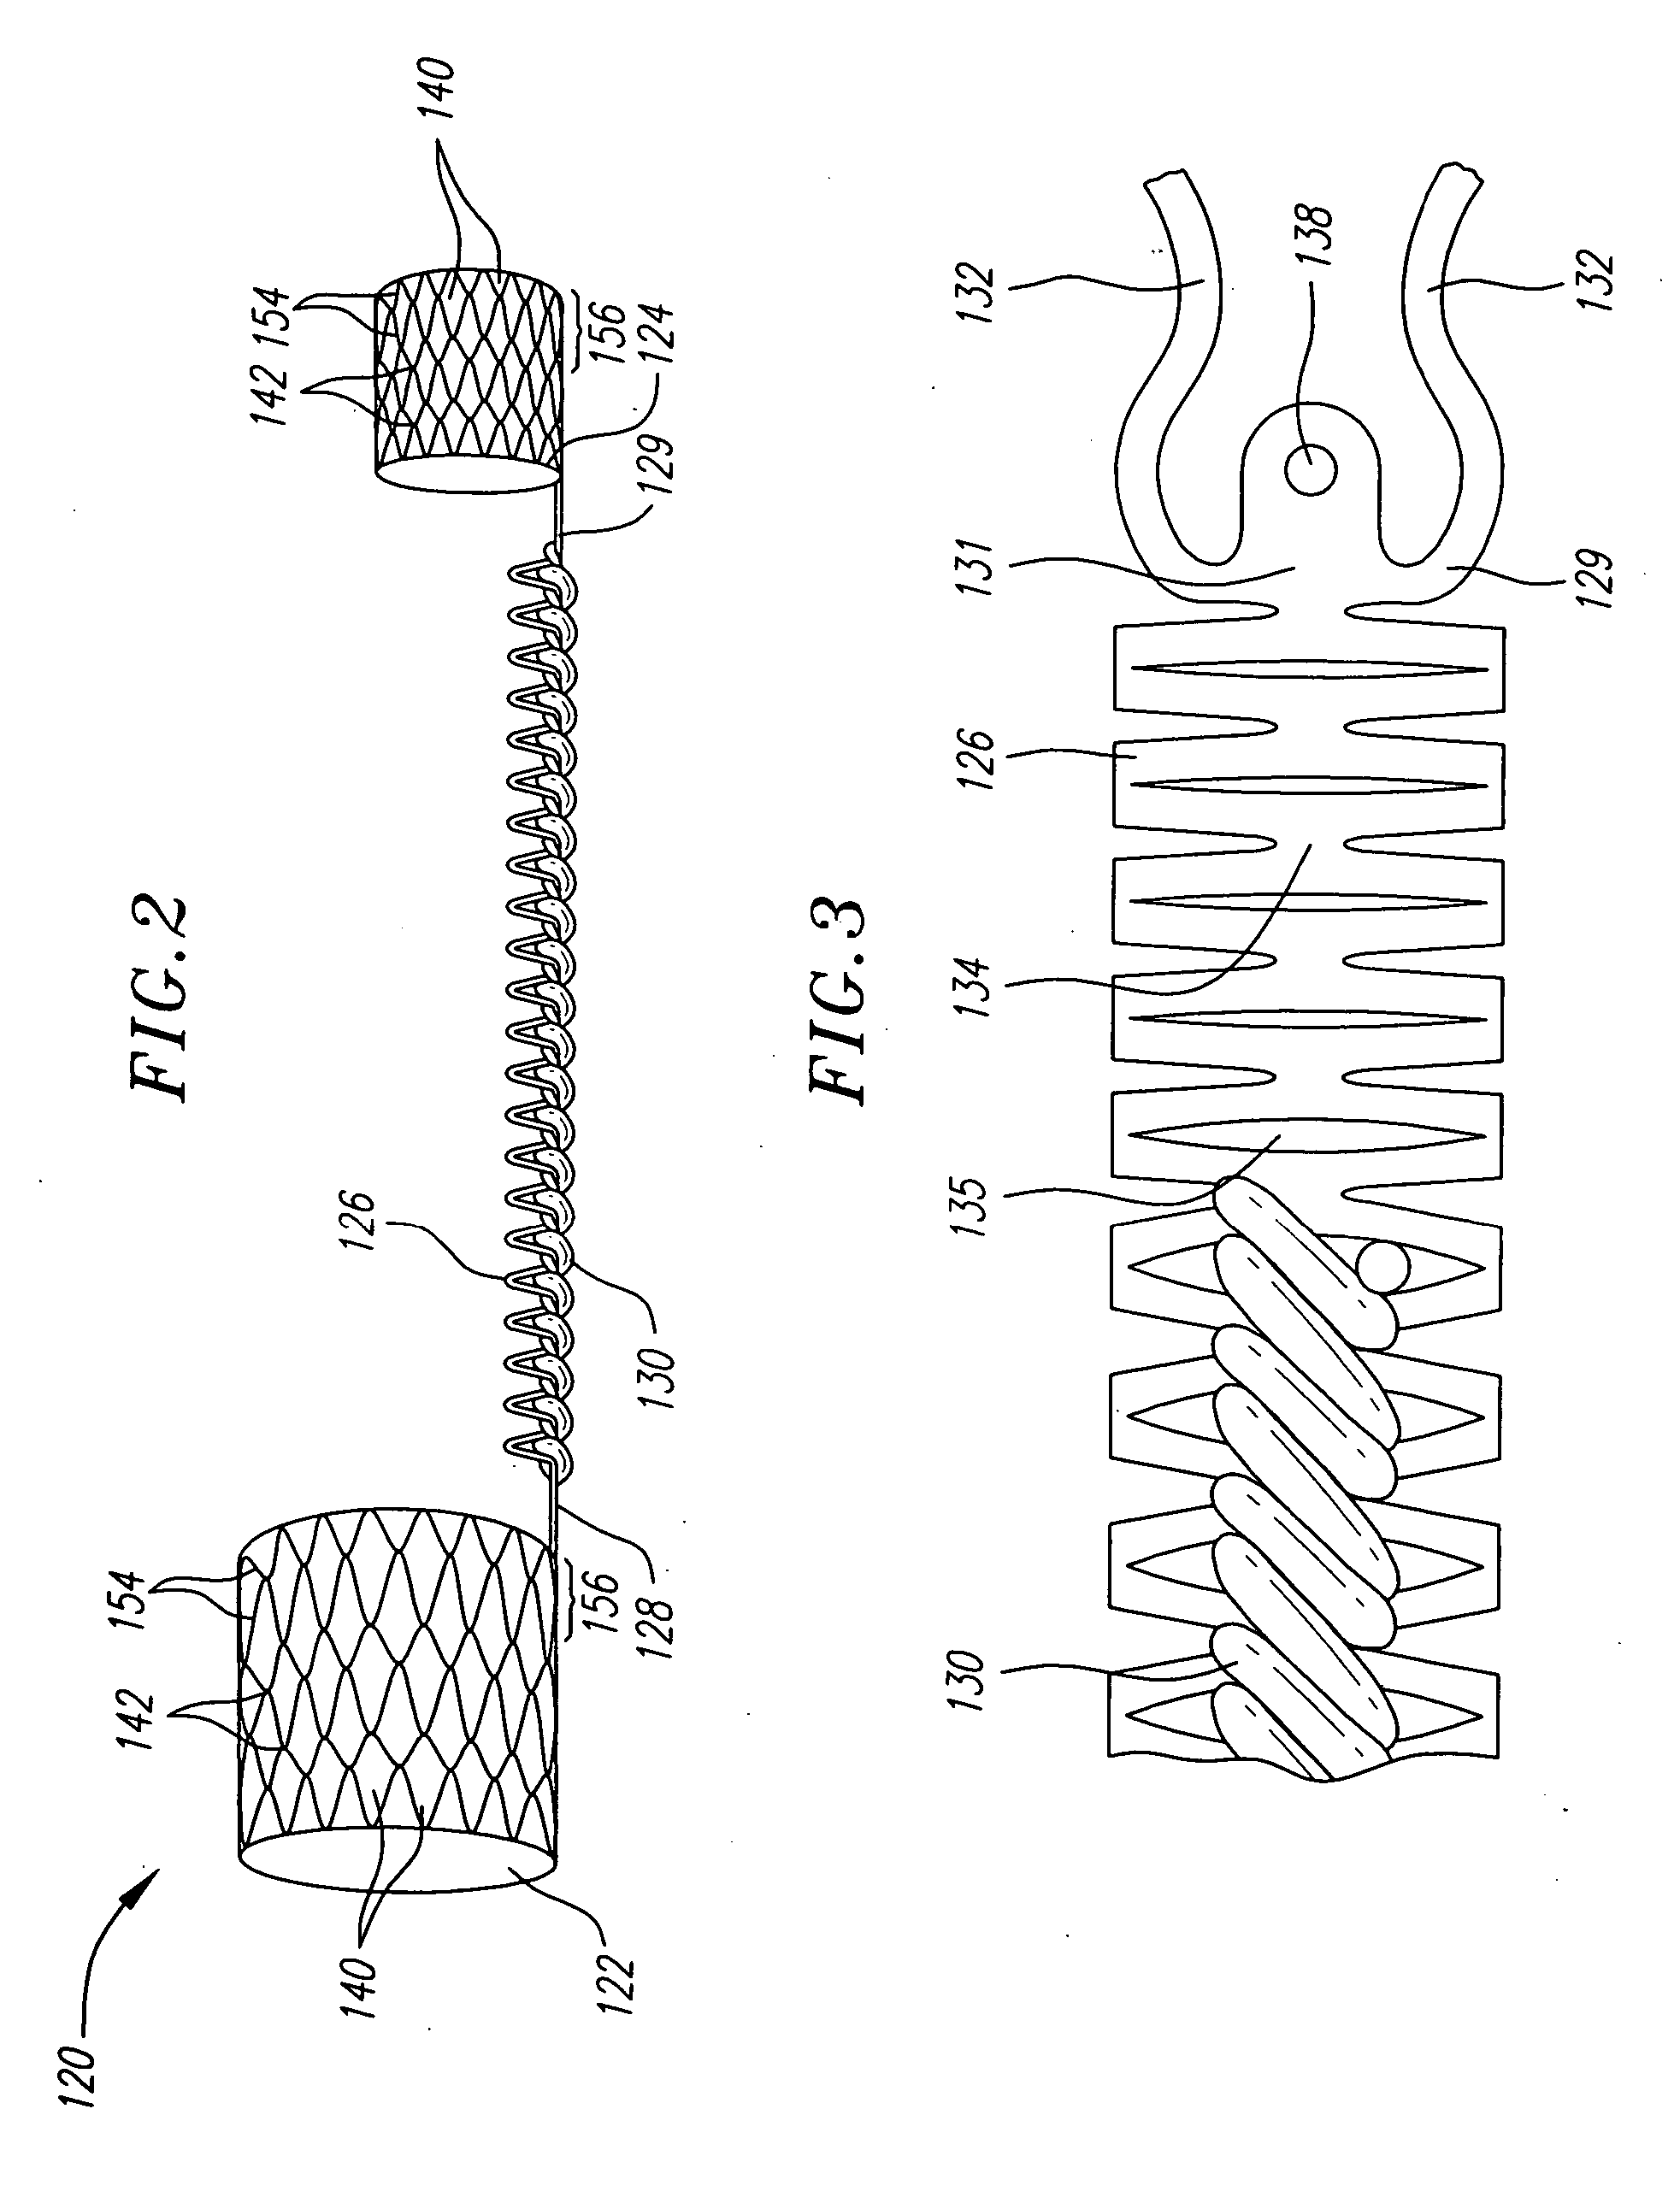 System and method for delivering a mitral valve repair device